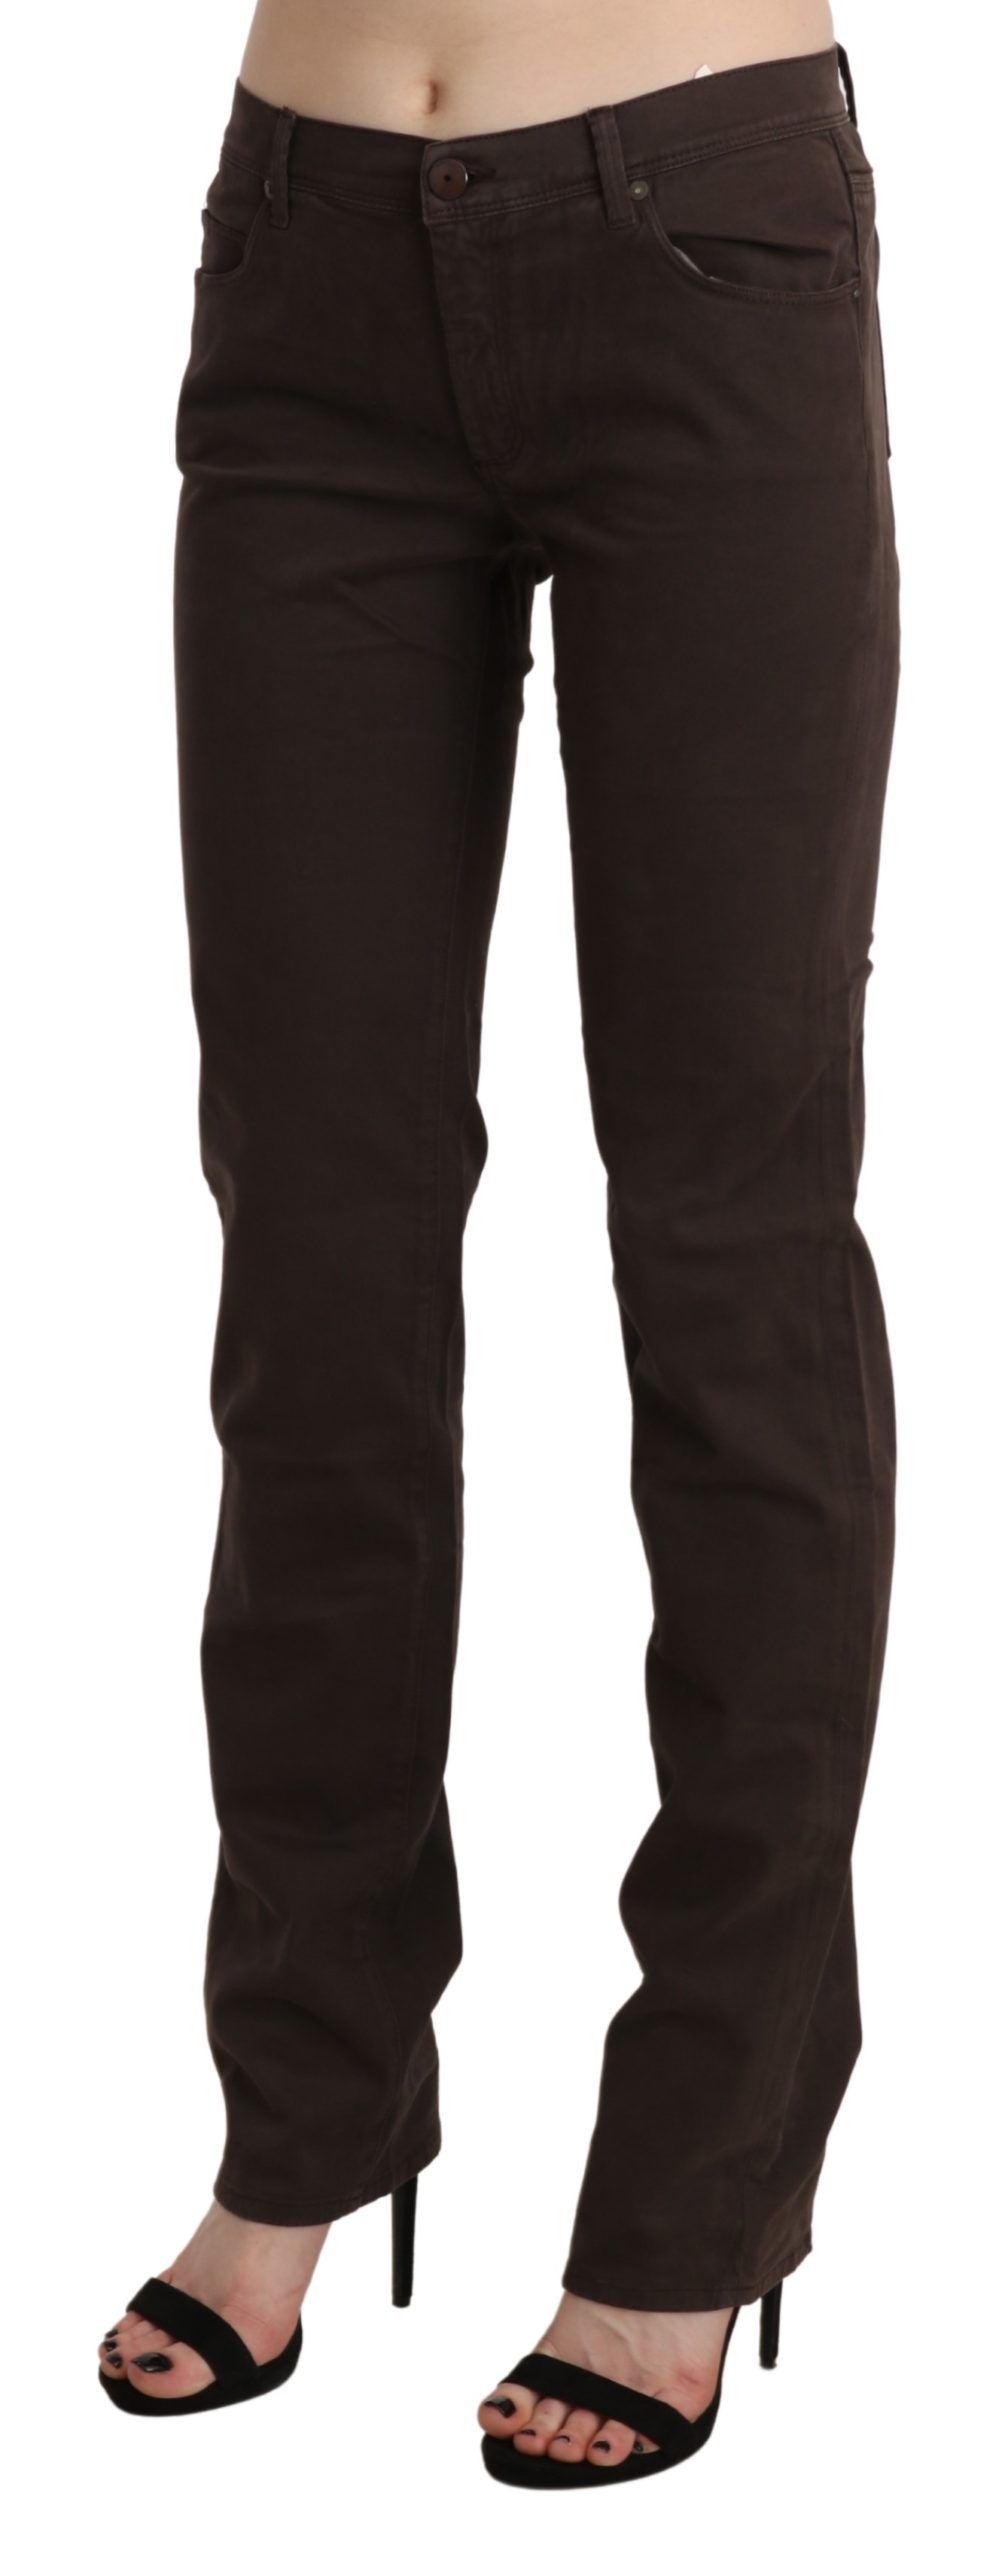 Chic Brown Mid Waist Skinny Trousers